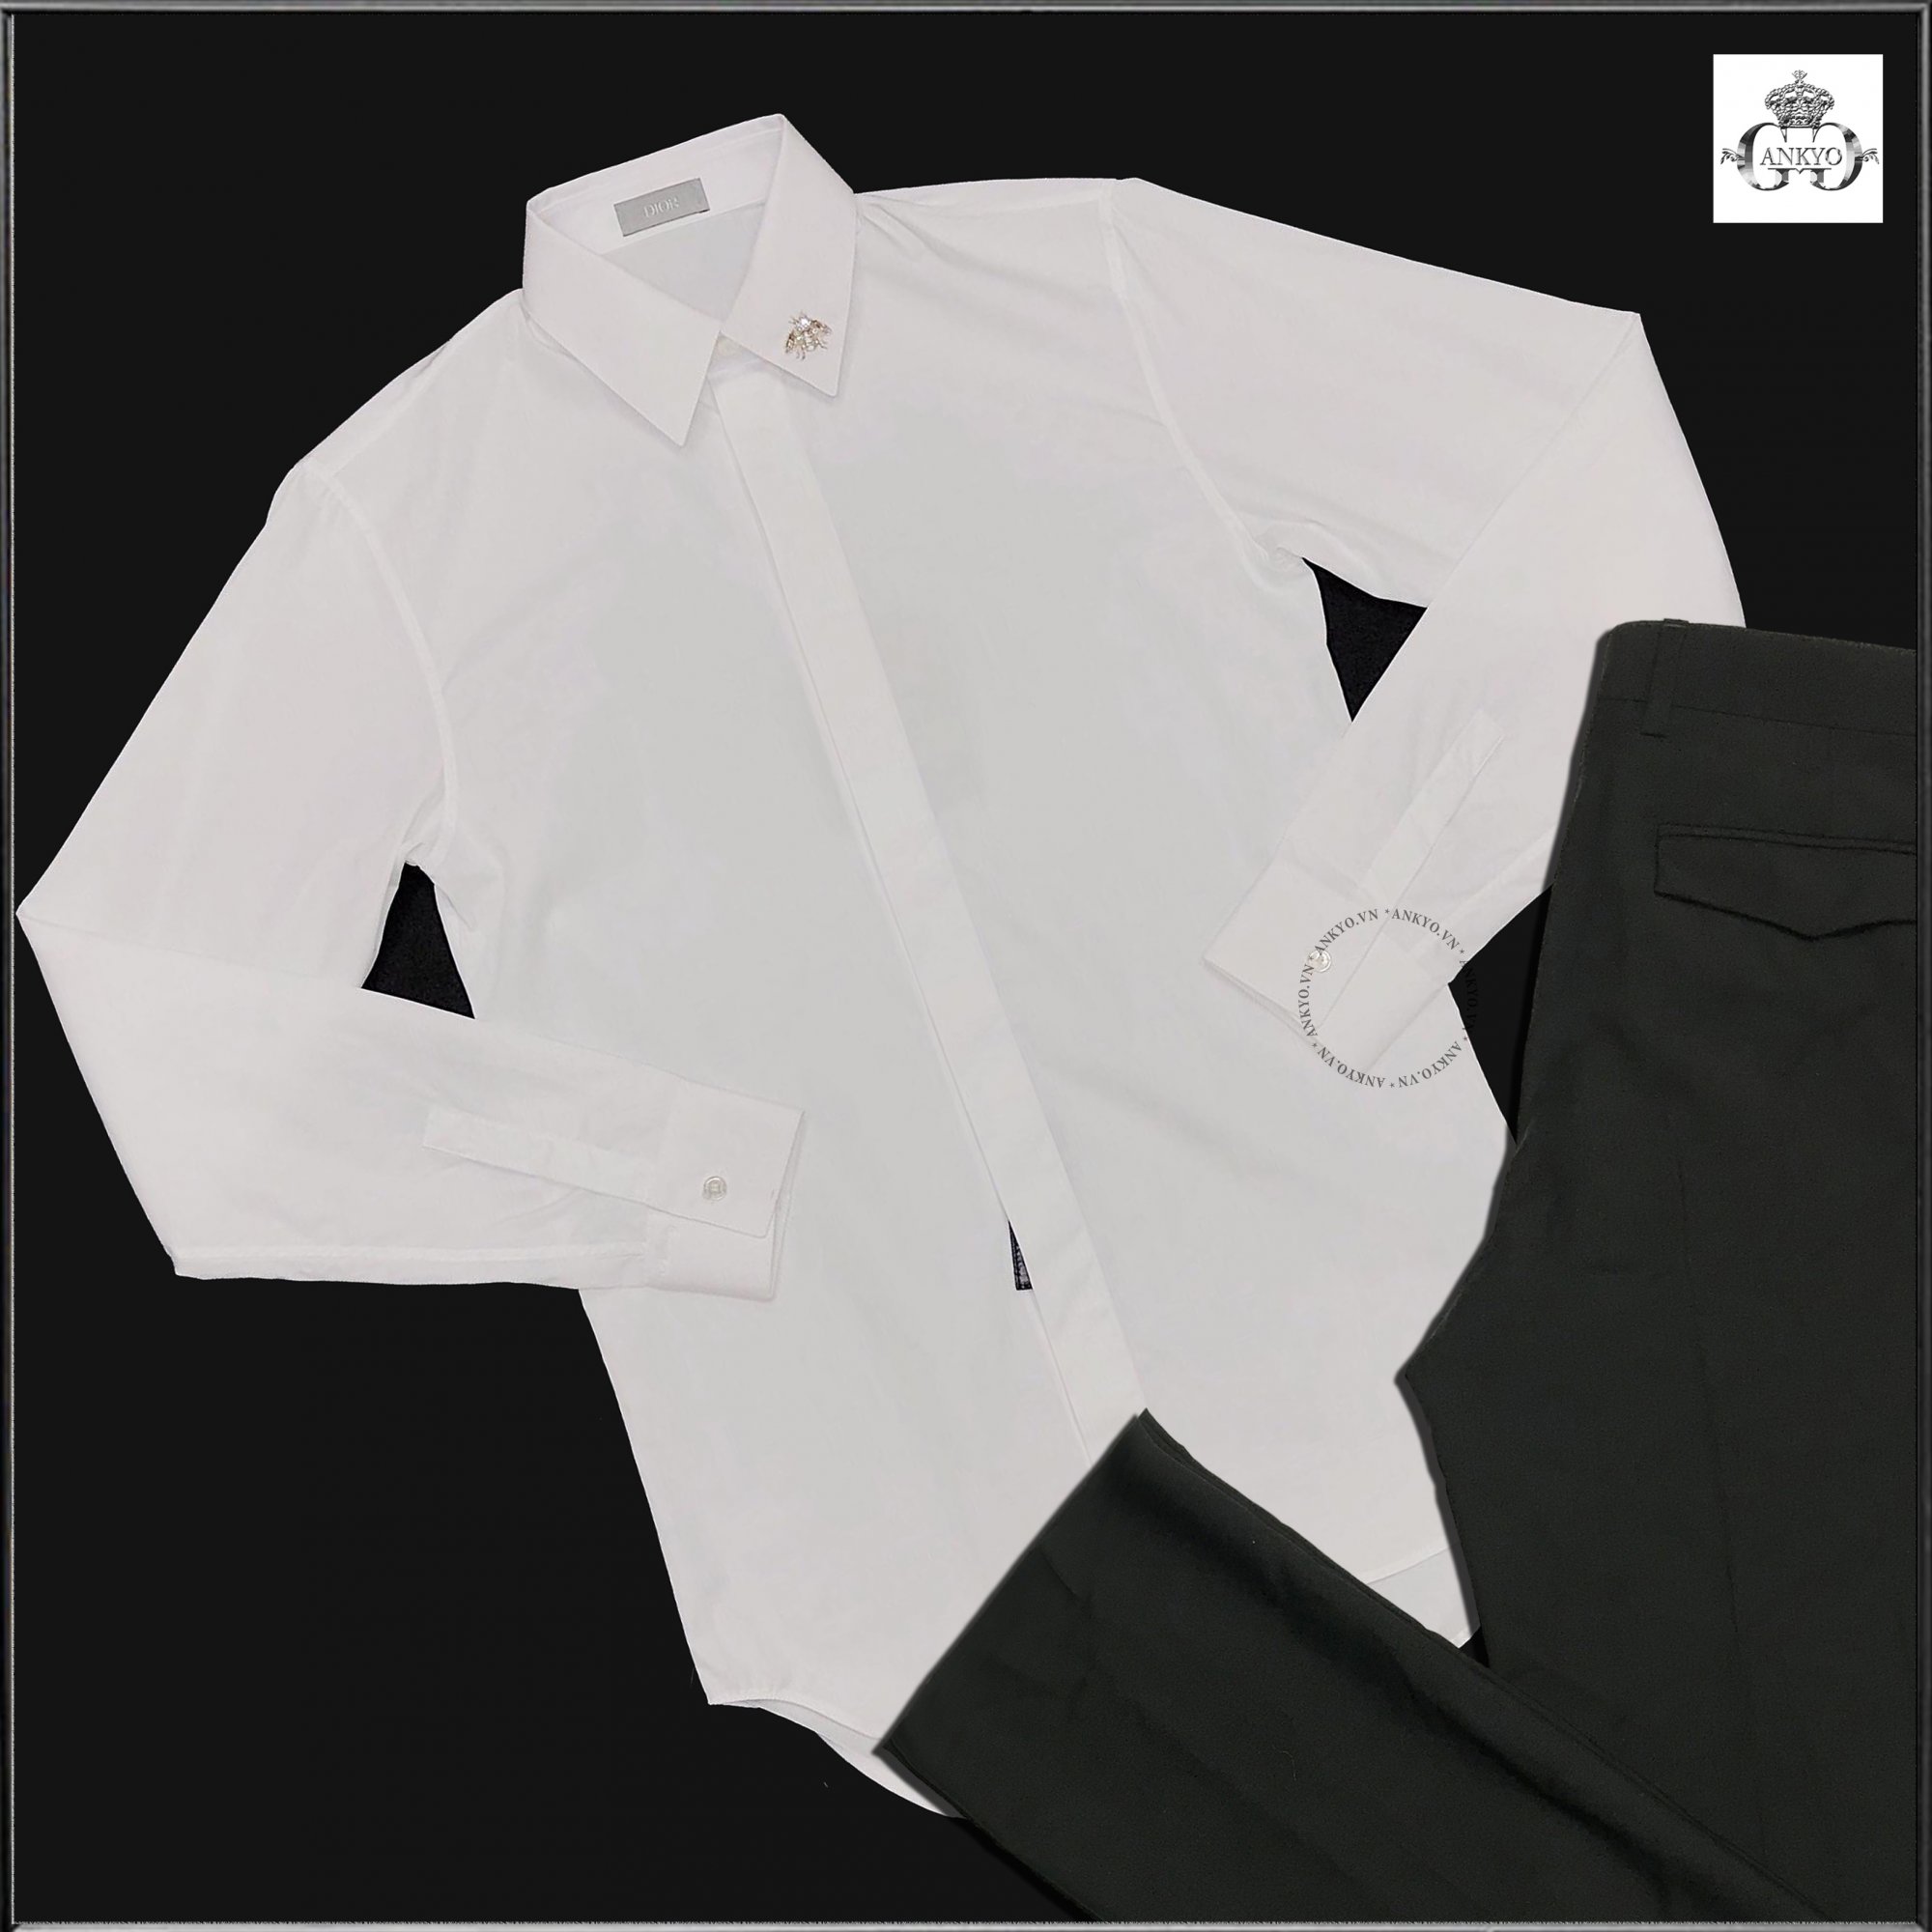 DIOR HOMME Shirt With Bee Jewel White Cotton Poplin (Ong 3D) (2).jpg